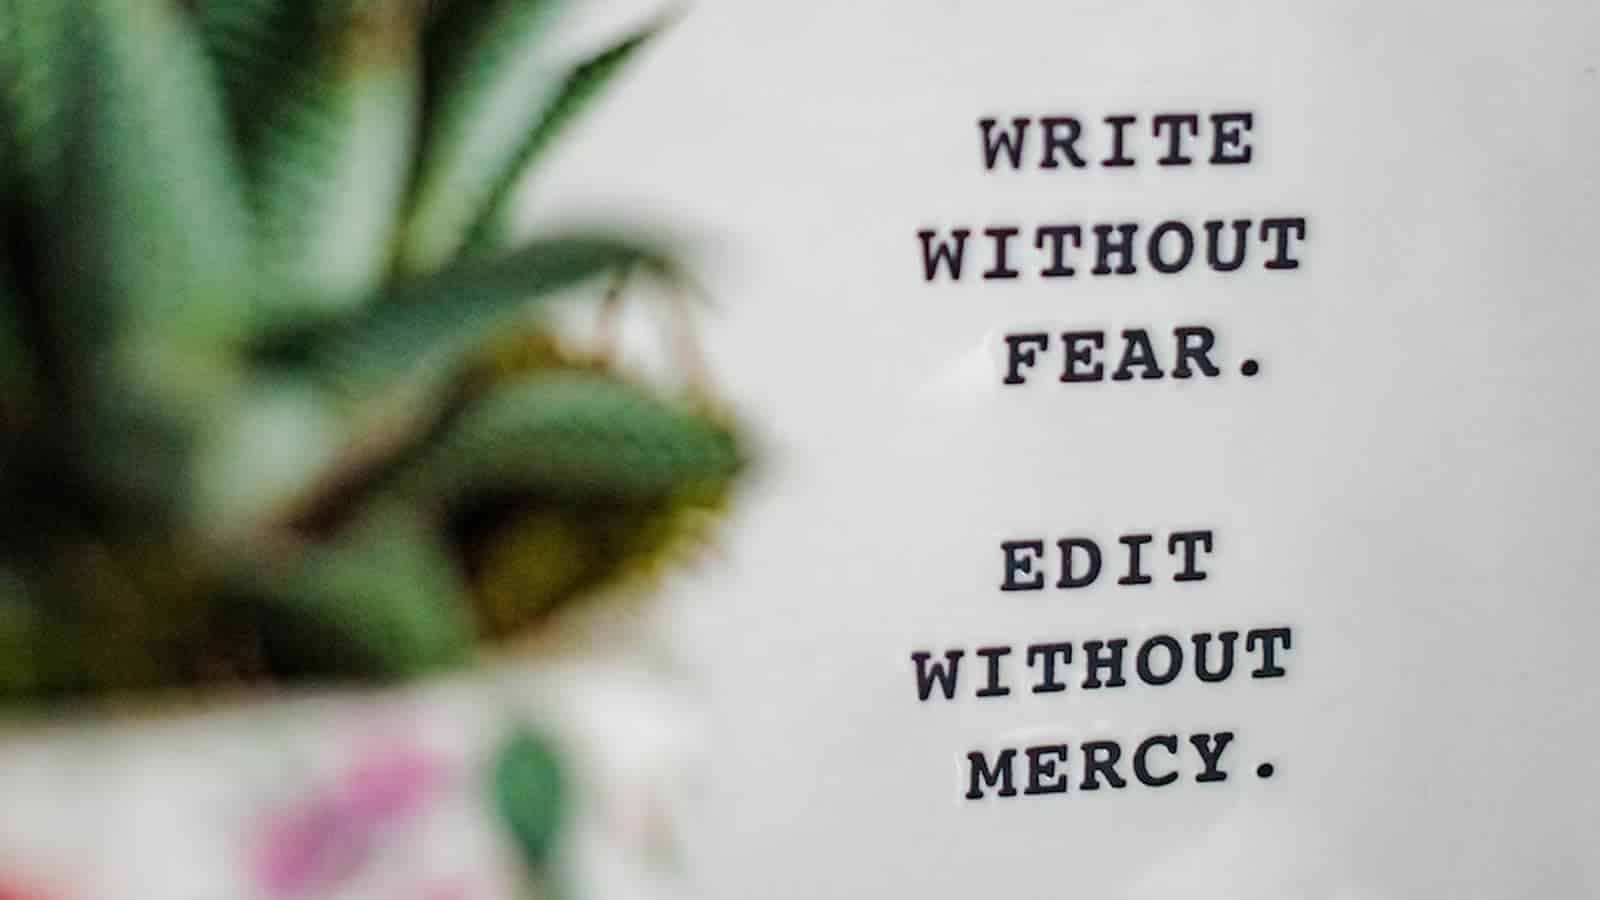 Write without fear